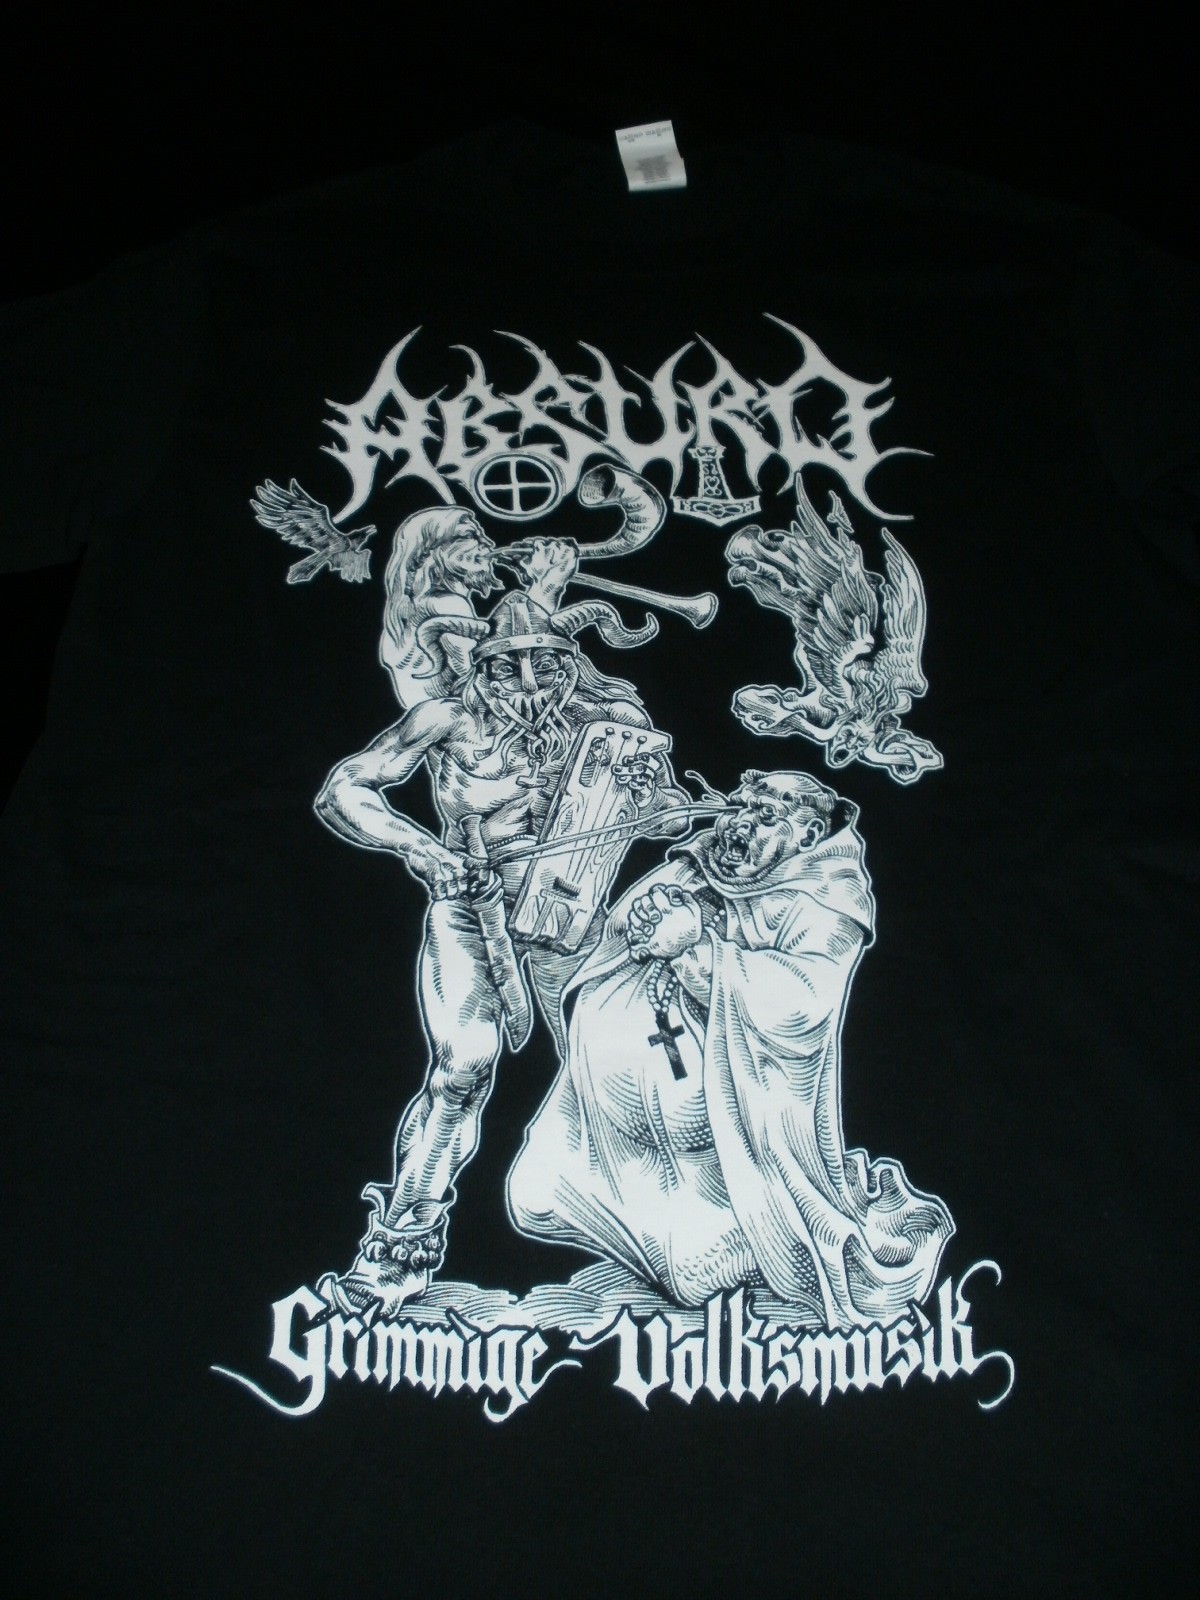 Absurd - Grimmige Front